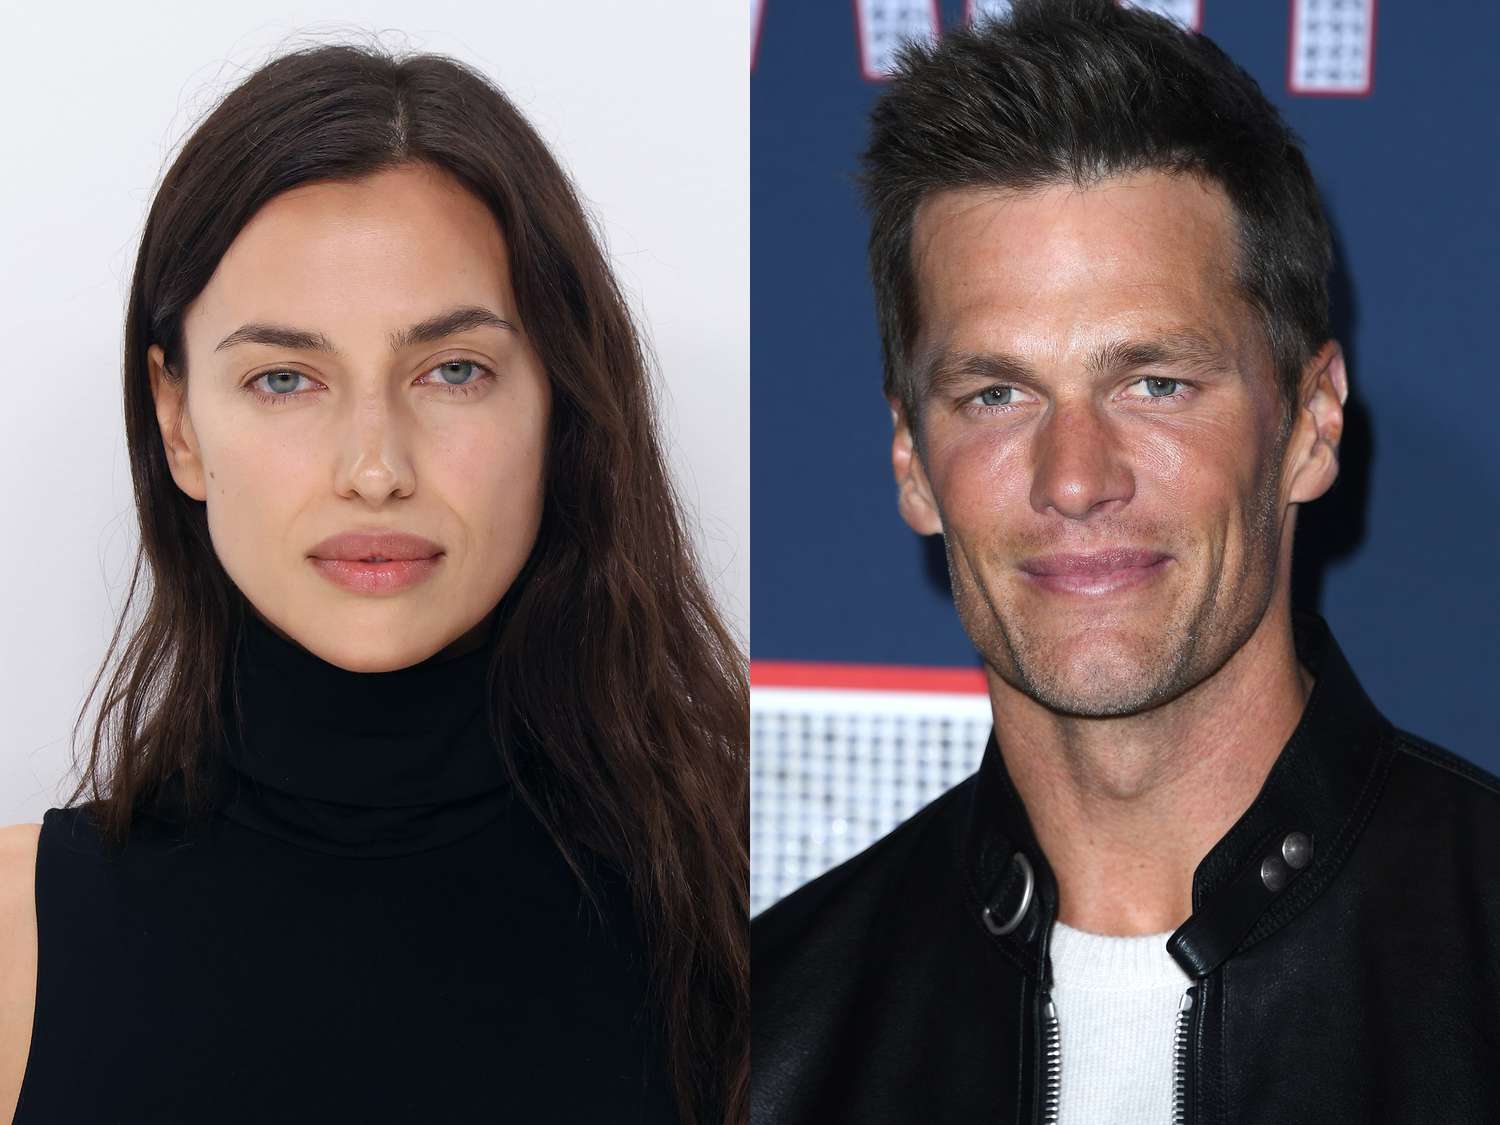 tom-brady-and-irina-shayk-spotted-together-ahead-of-miami-art-basel-party